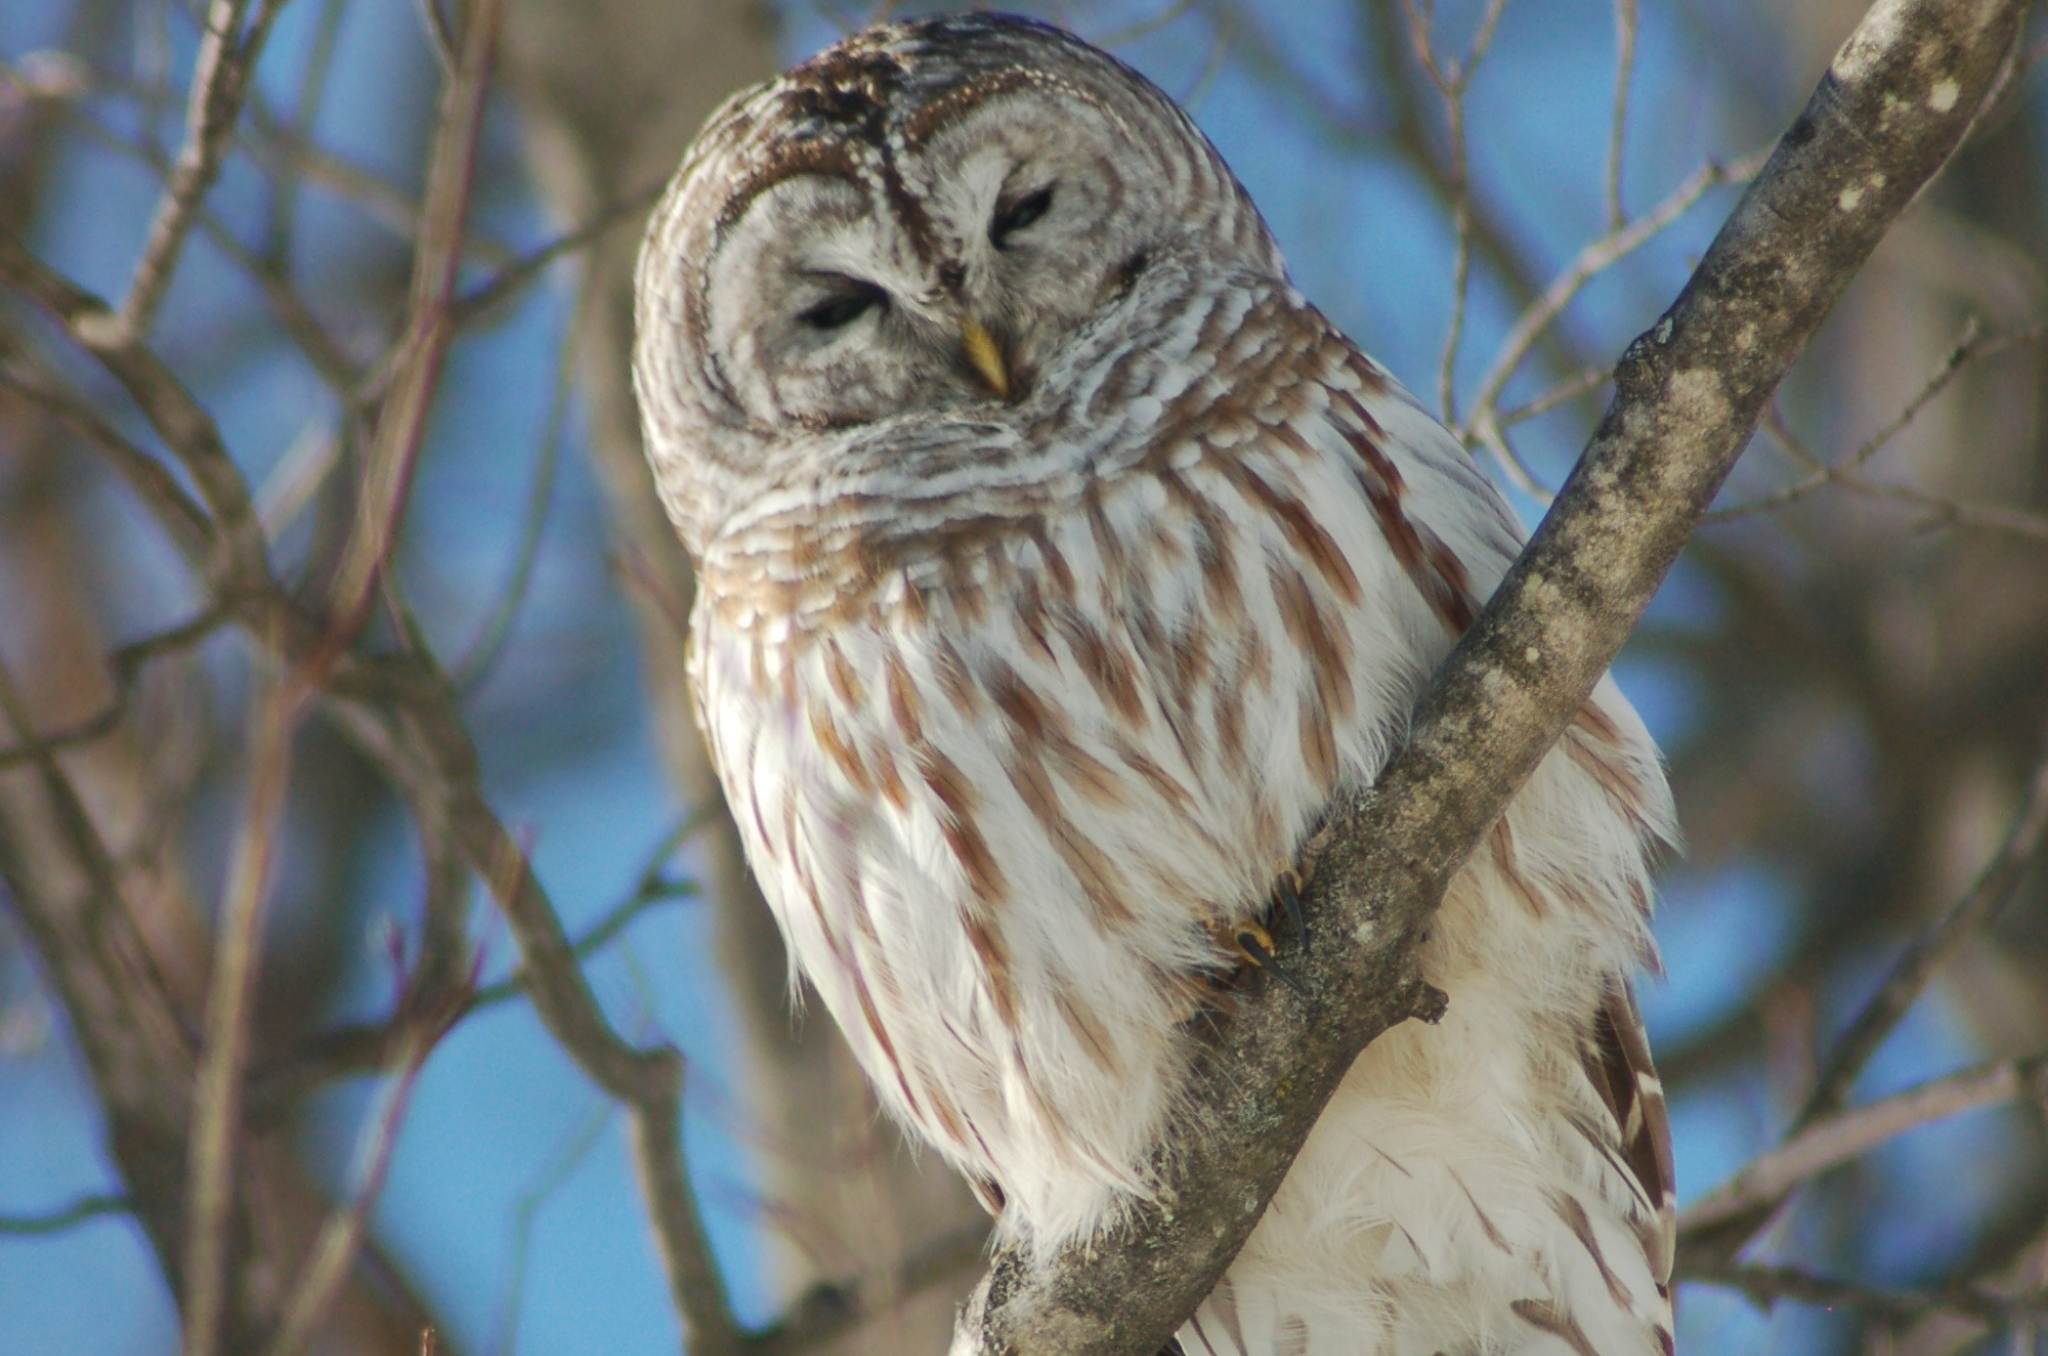 Large white and brown owl perched on branch with blue ski behind it looking down on you